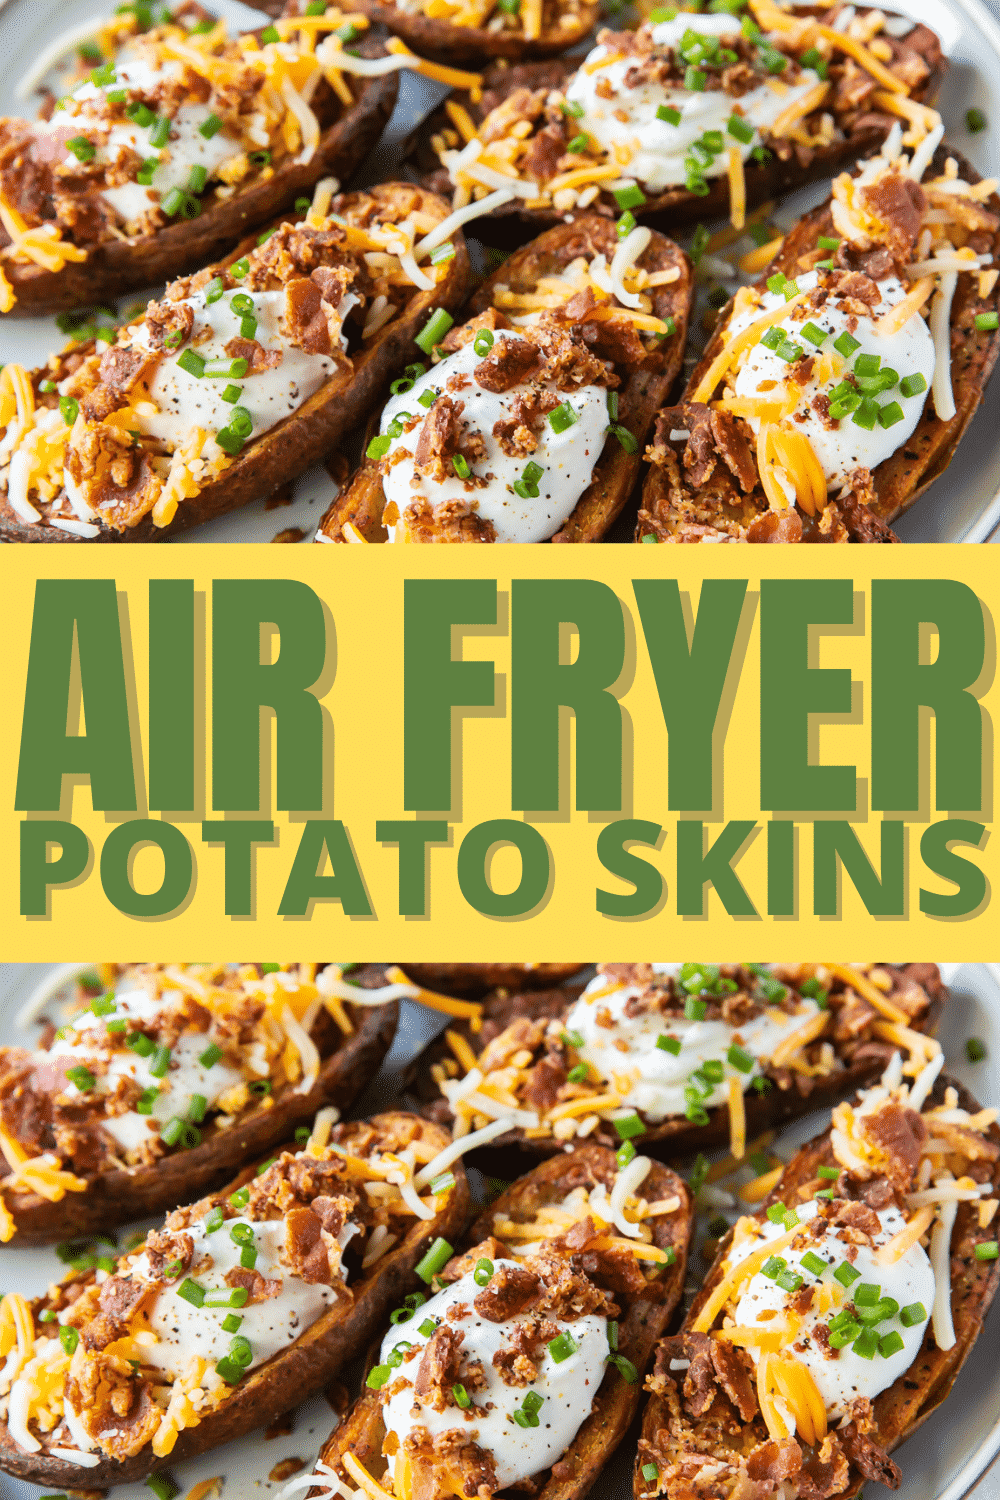 You can turn baked potatoes into cheesy, delicious Air Fryer Potato Skins. Nobody can resist this air fryer version of a favorite bar appetizer, topped with cheese, bacon, sour cream, and chives. #appetizer #airfryer #potatoskins via @vegetarianmamma